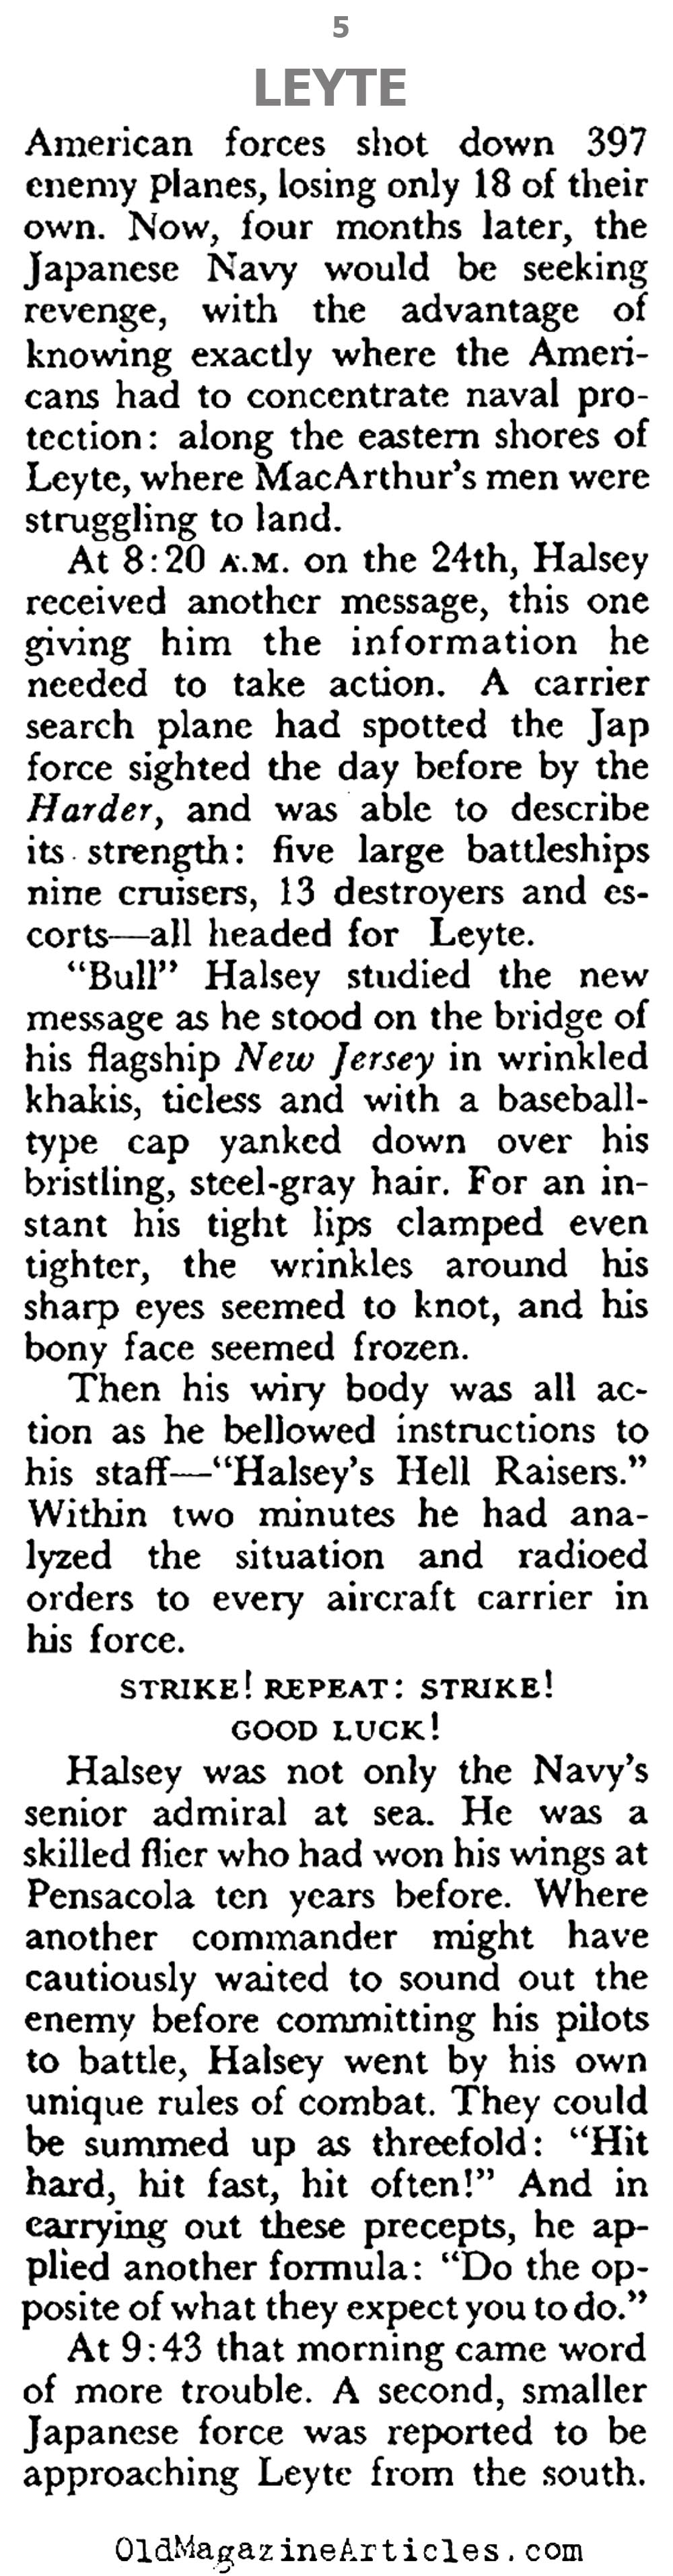 Halsey at Leyte Gulf (Pageant Magazine, 1960)